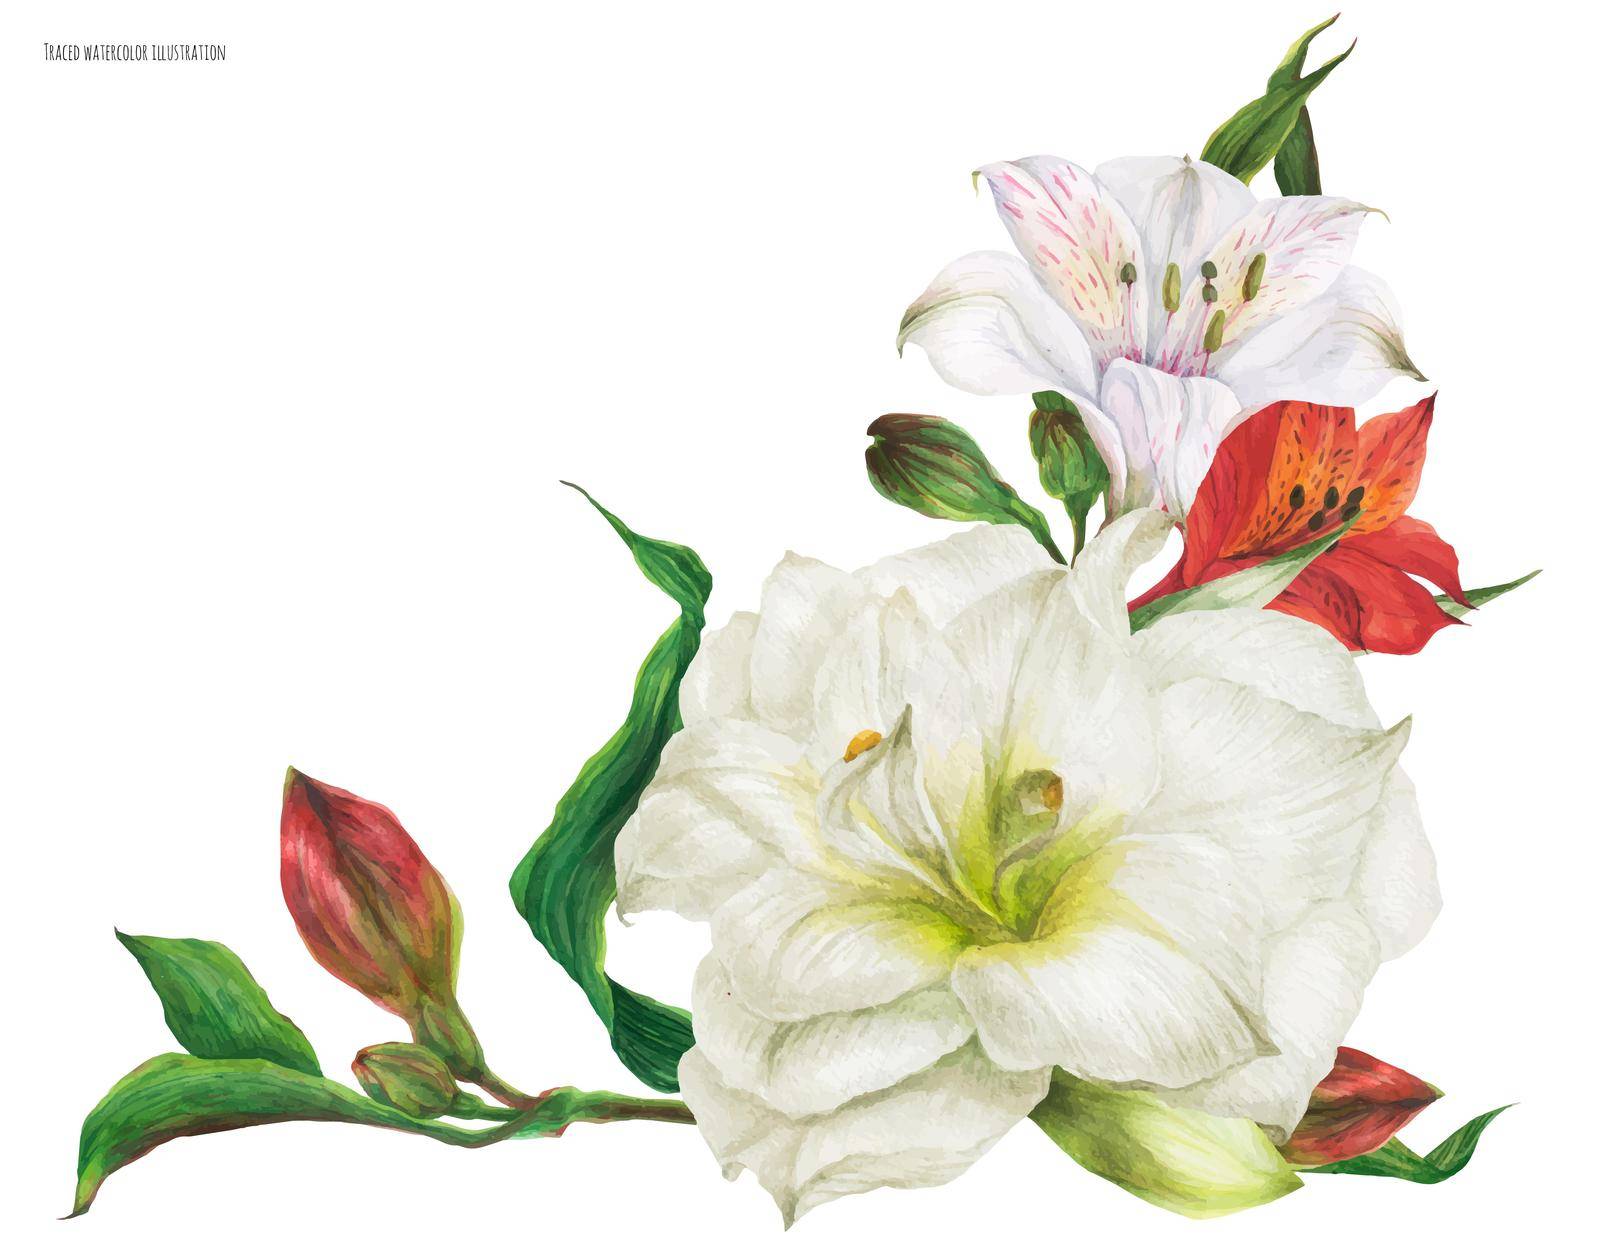 Bridal corsage bouquet with lily flowers, realistic watercolor traced illustration